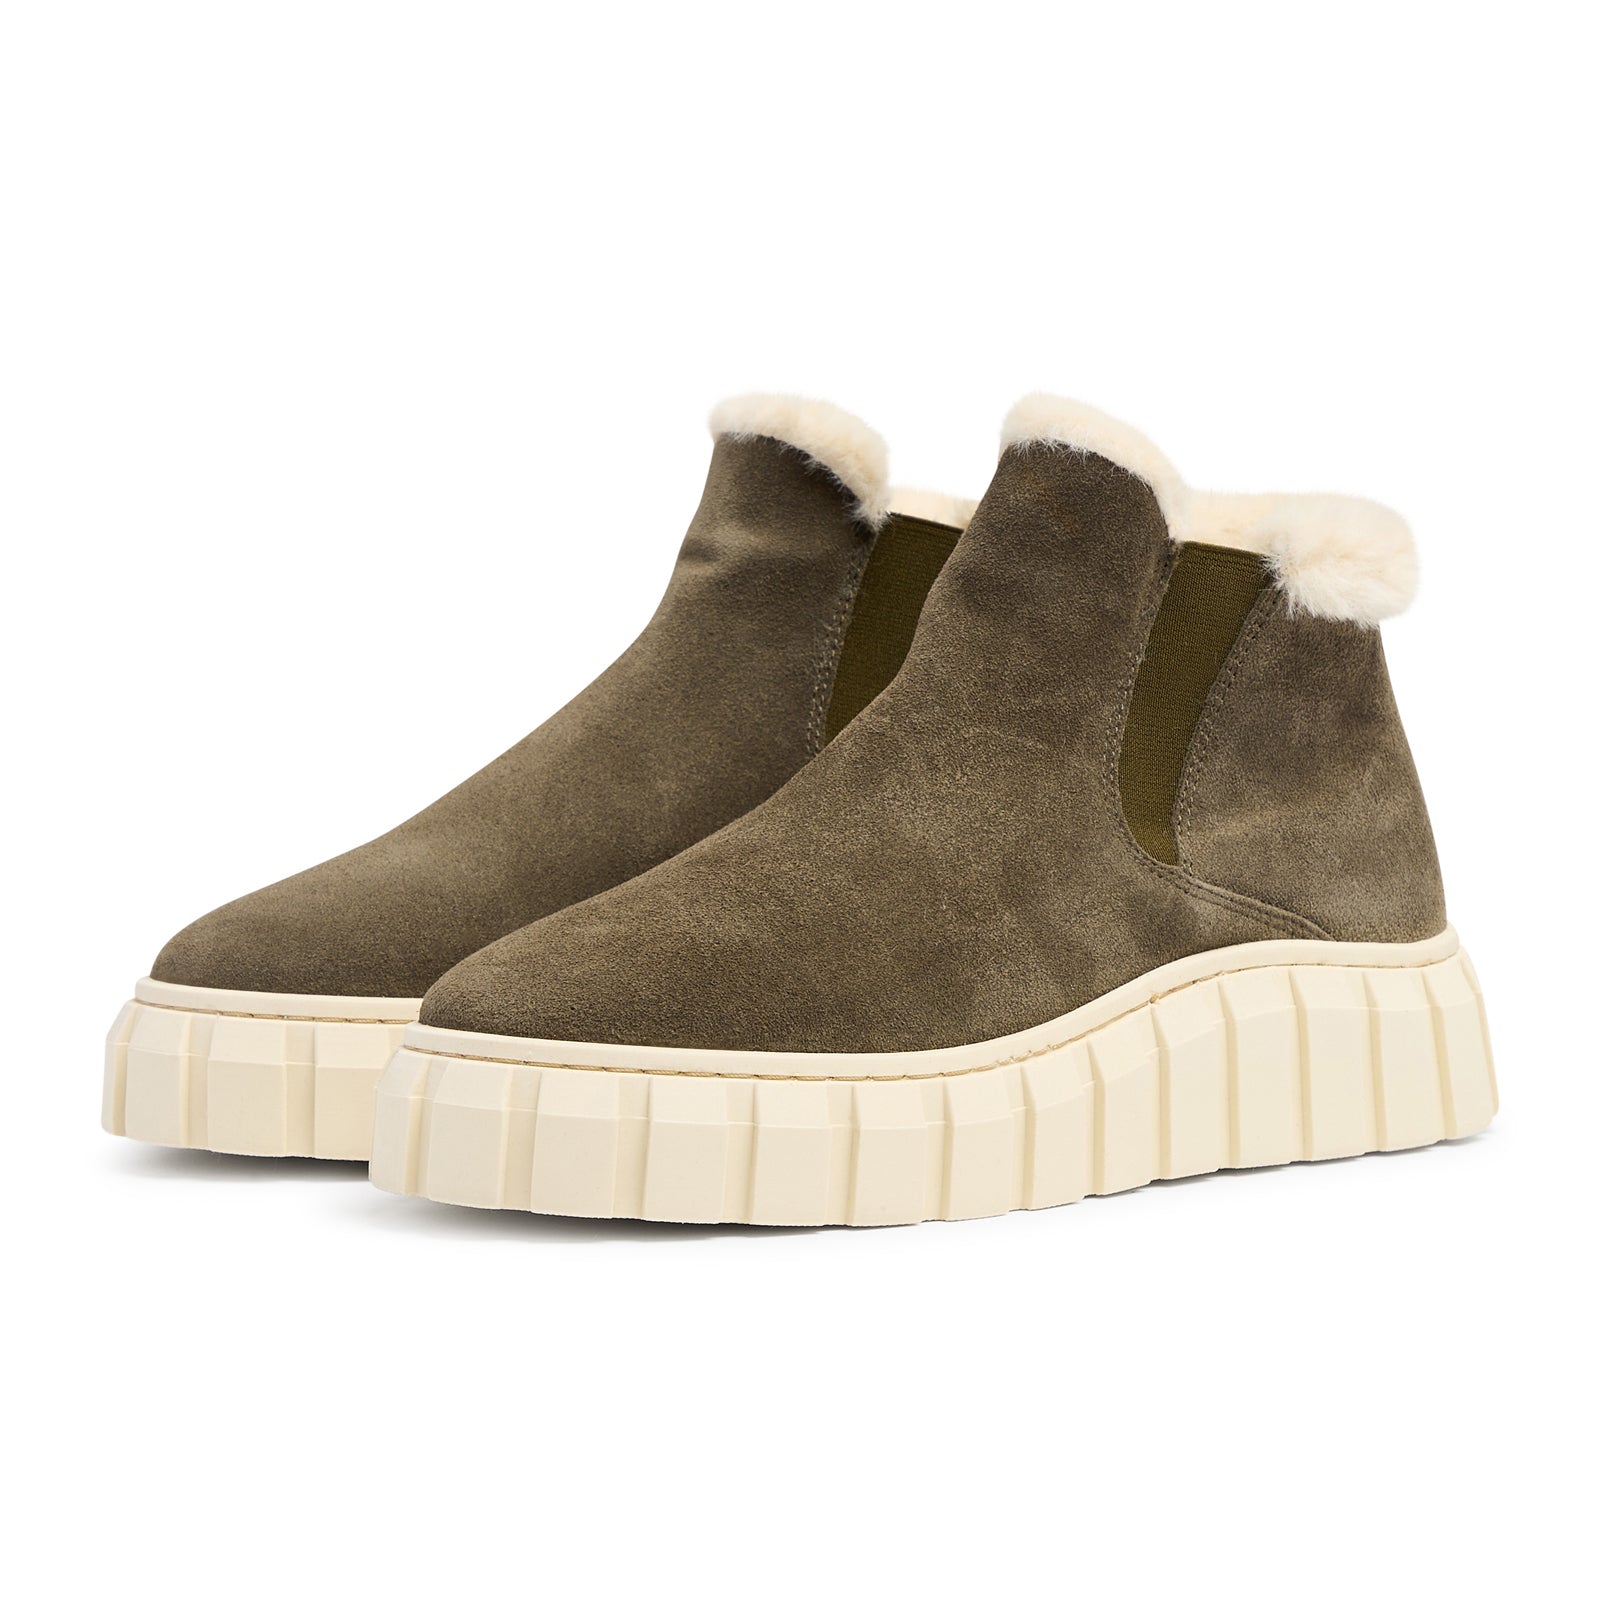 Balo Chelsea Boot - Army Suede